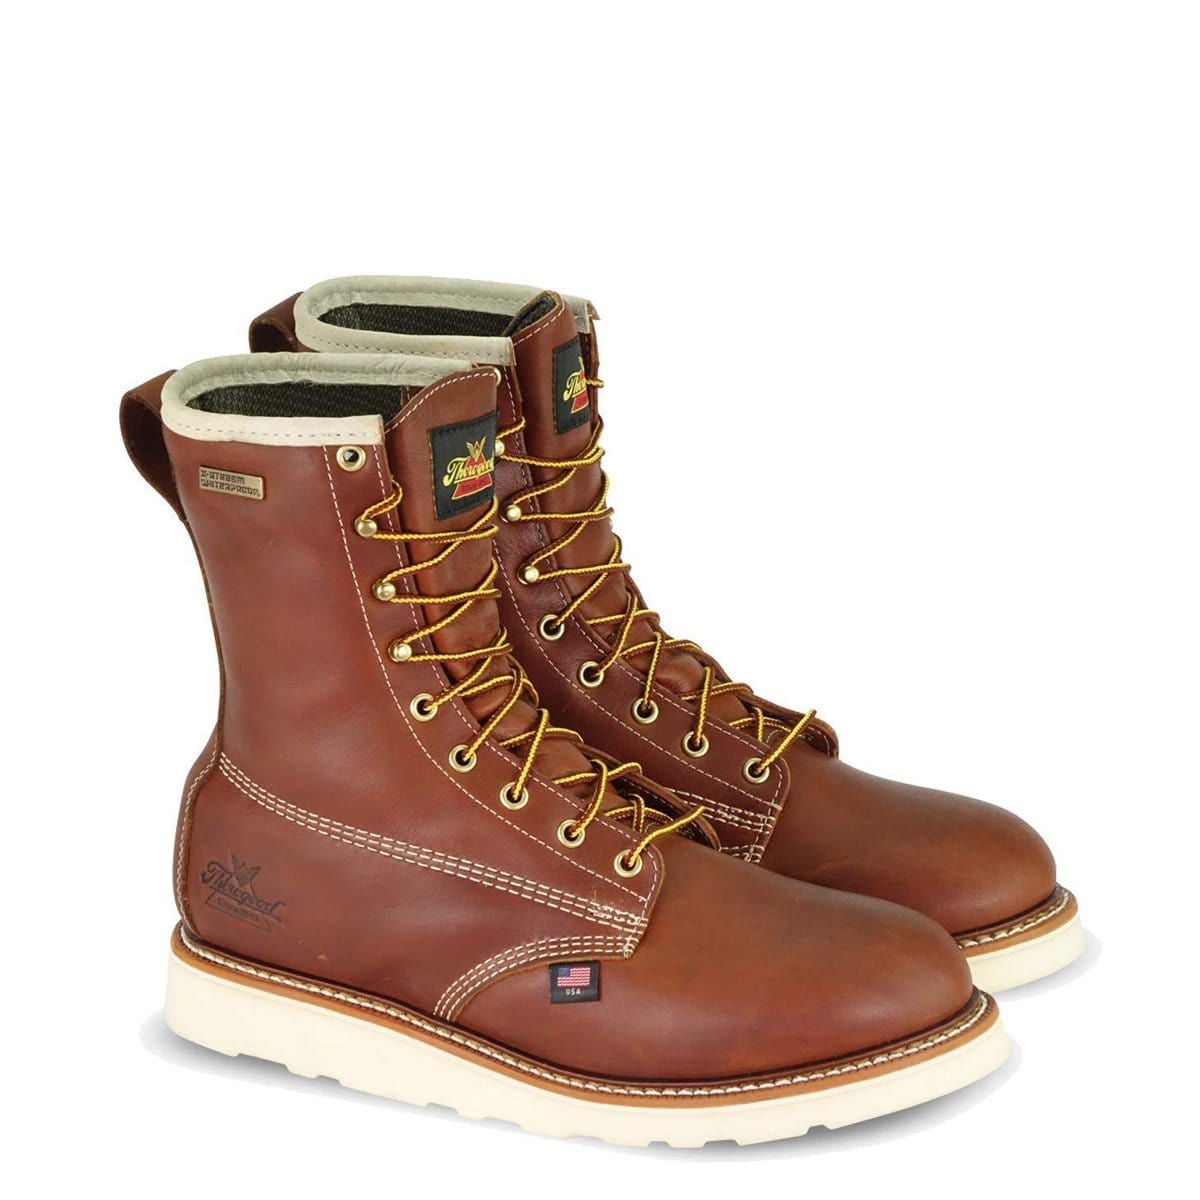 All Thorogood Clearance Boots 